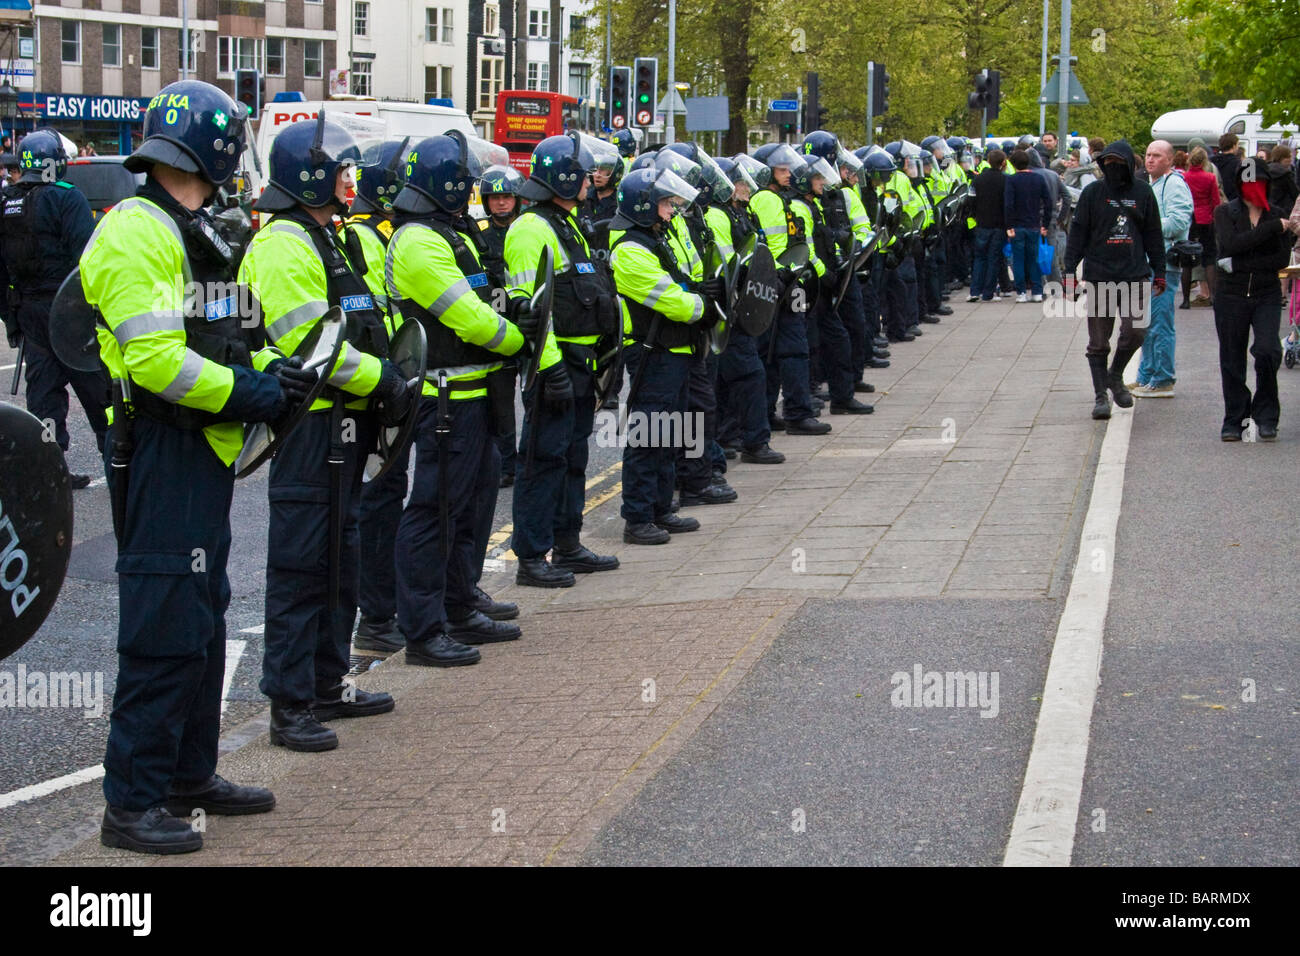 Riot police line the road observing protests during may day protests in Brighton, Sussex, UK JPH0192 Stock Photo